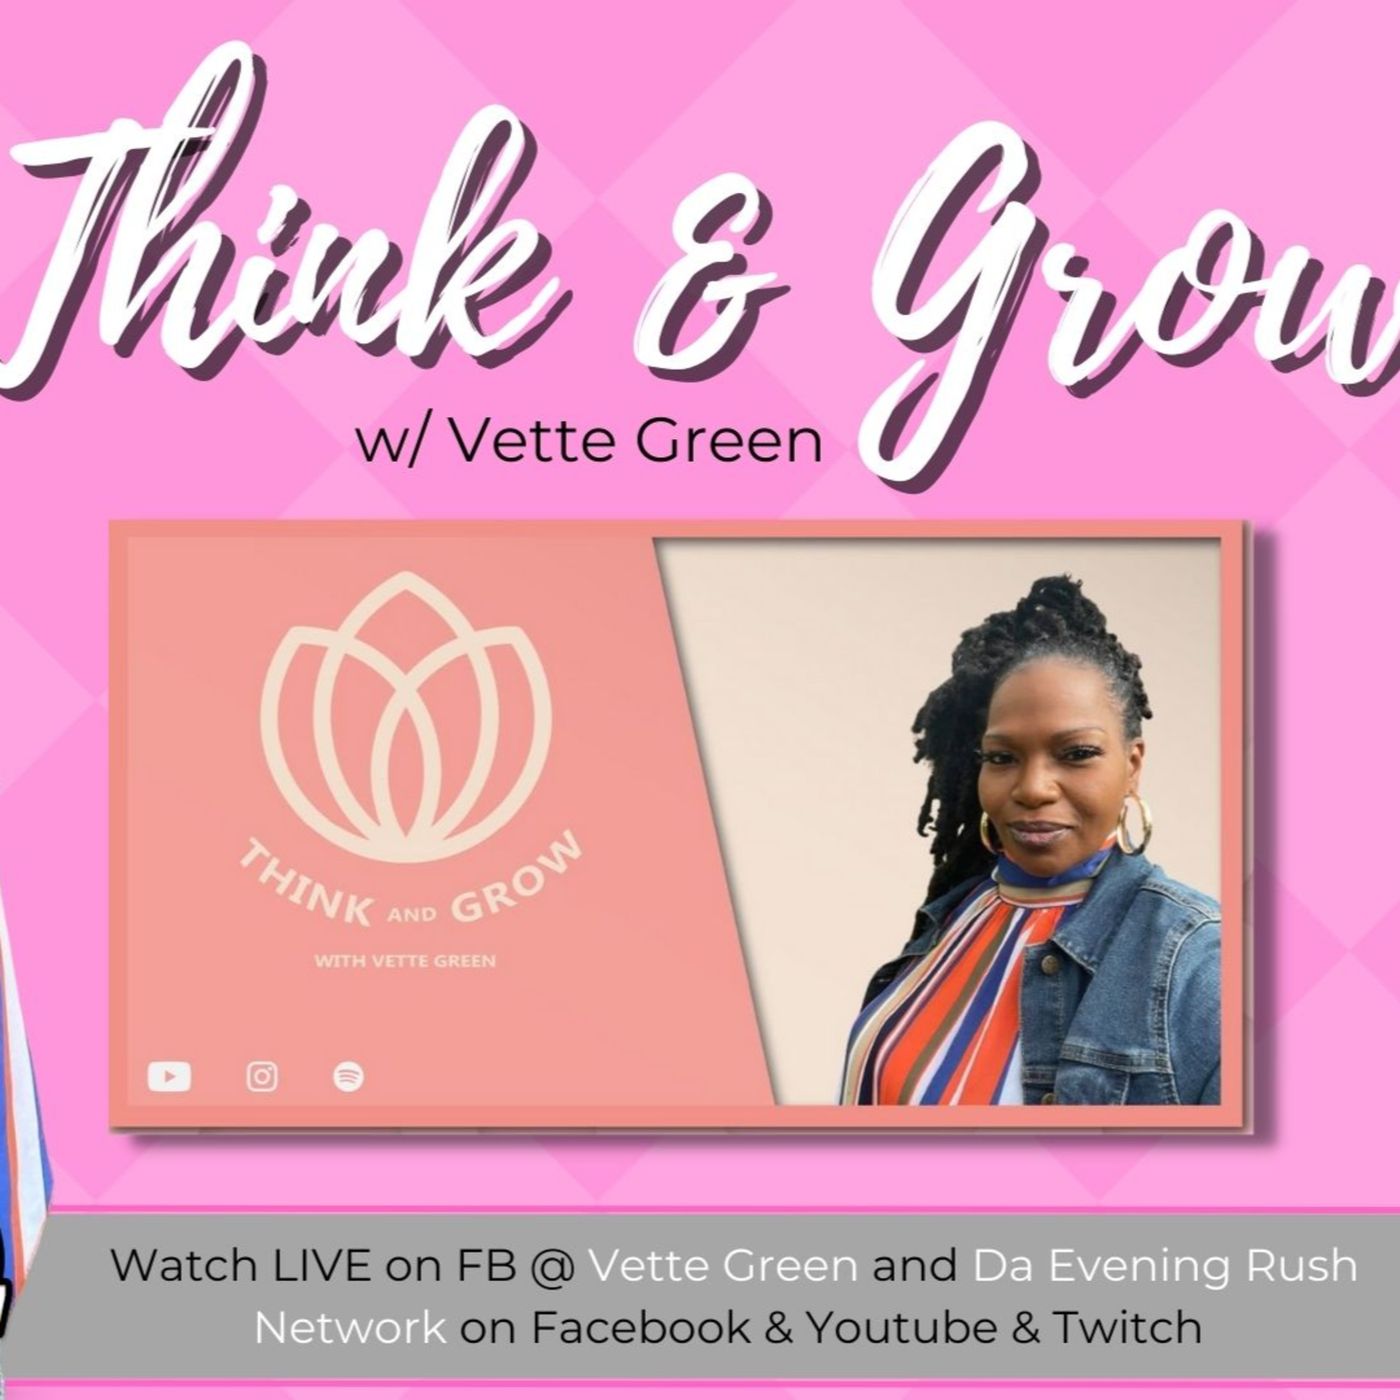 Think and Grow w/ Vette Green (S2 EP8): Our City Action In Buffalo